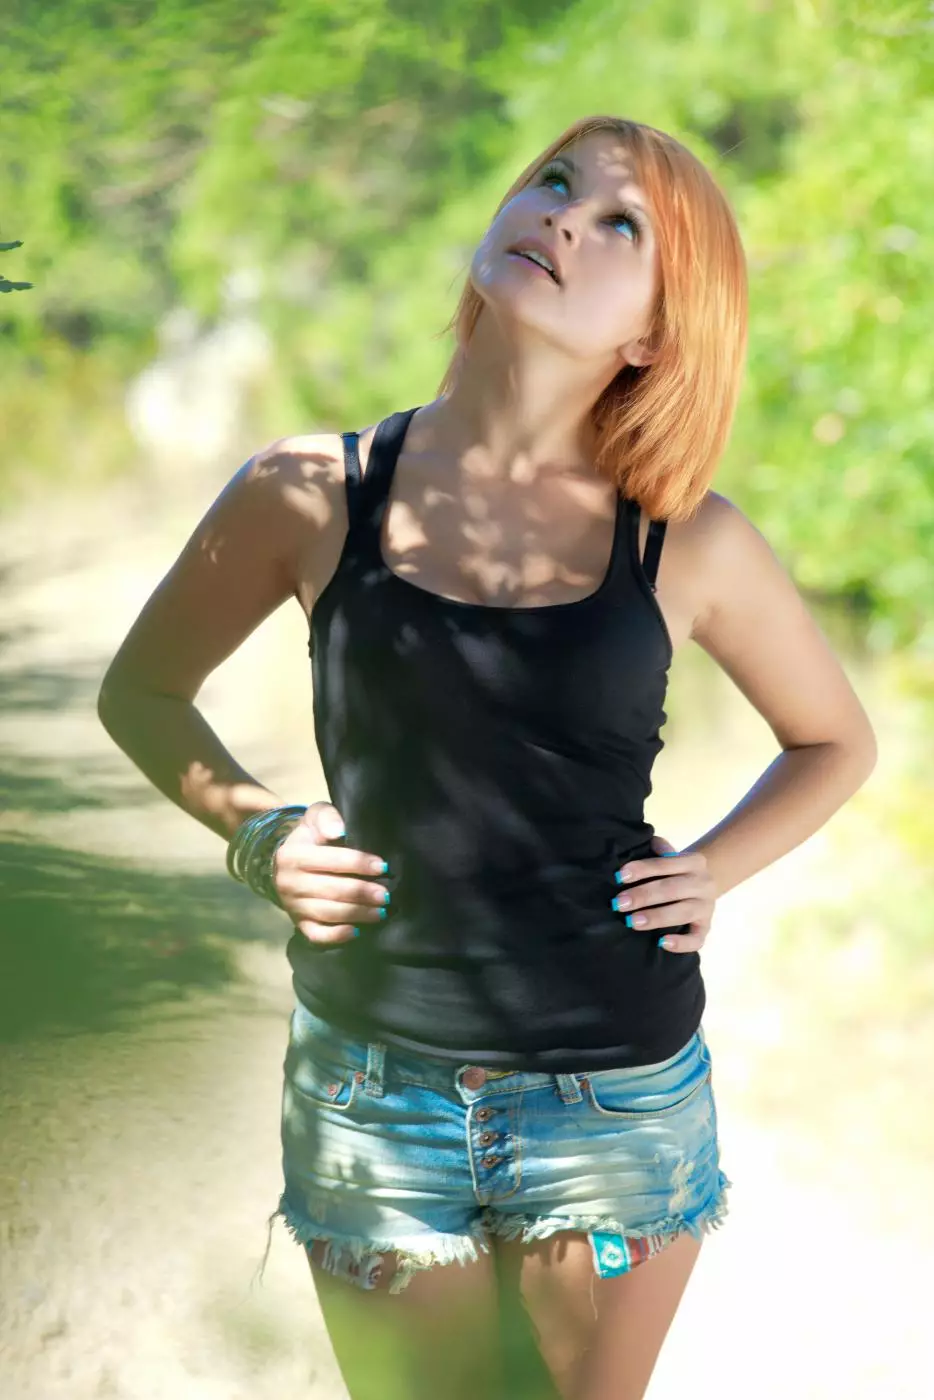 Softcore scenes with redhead chick Violla A stripping under the green trees